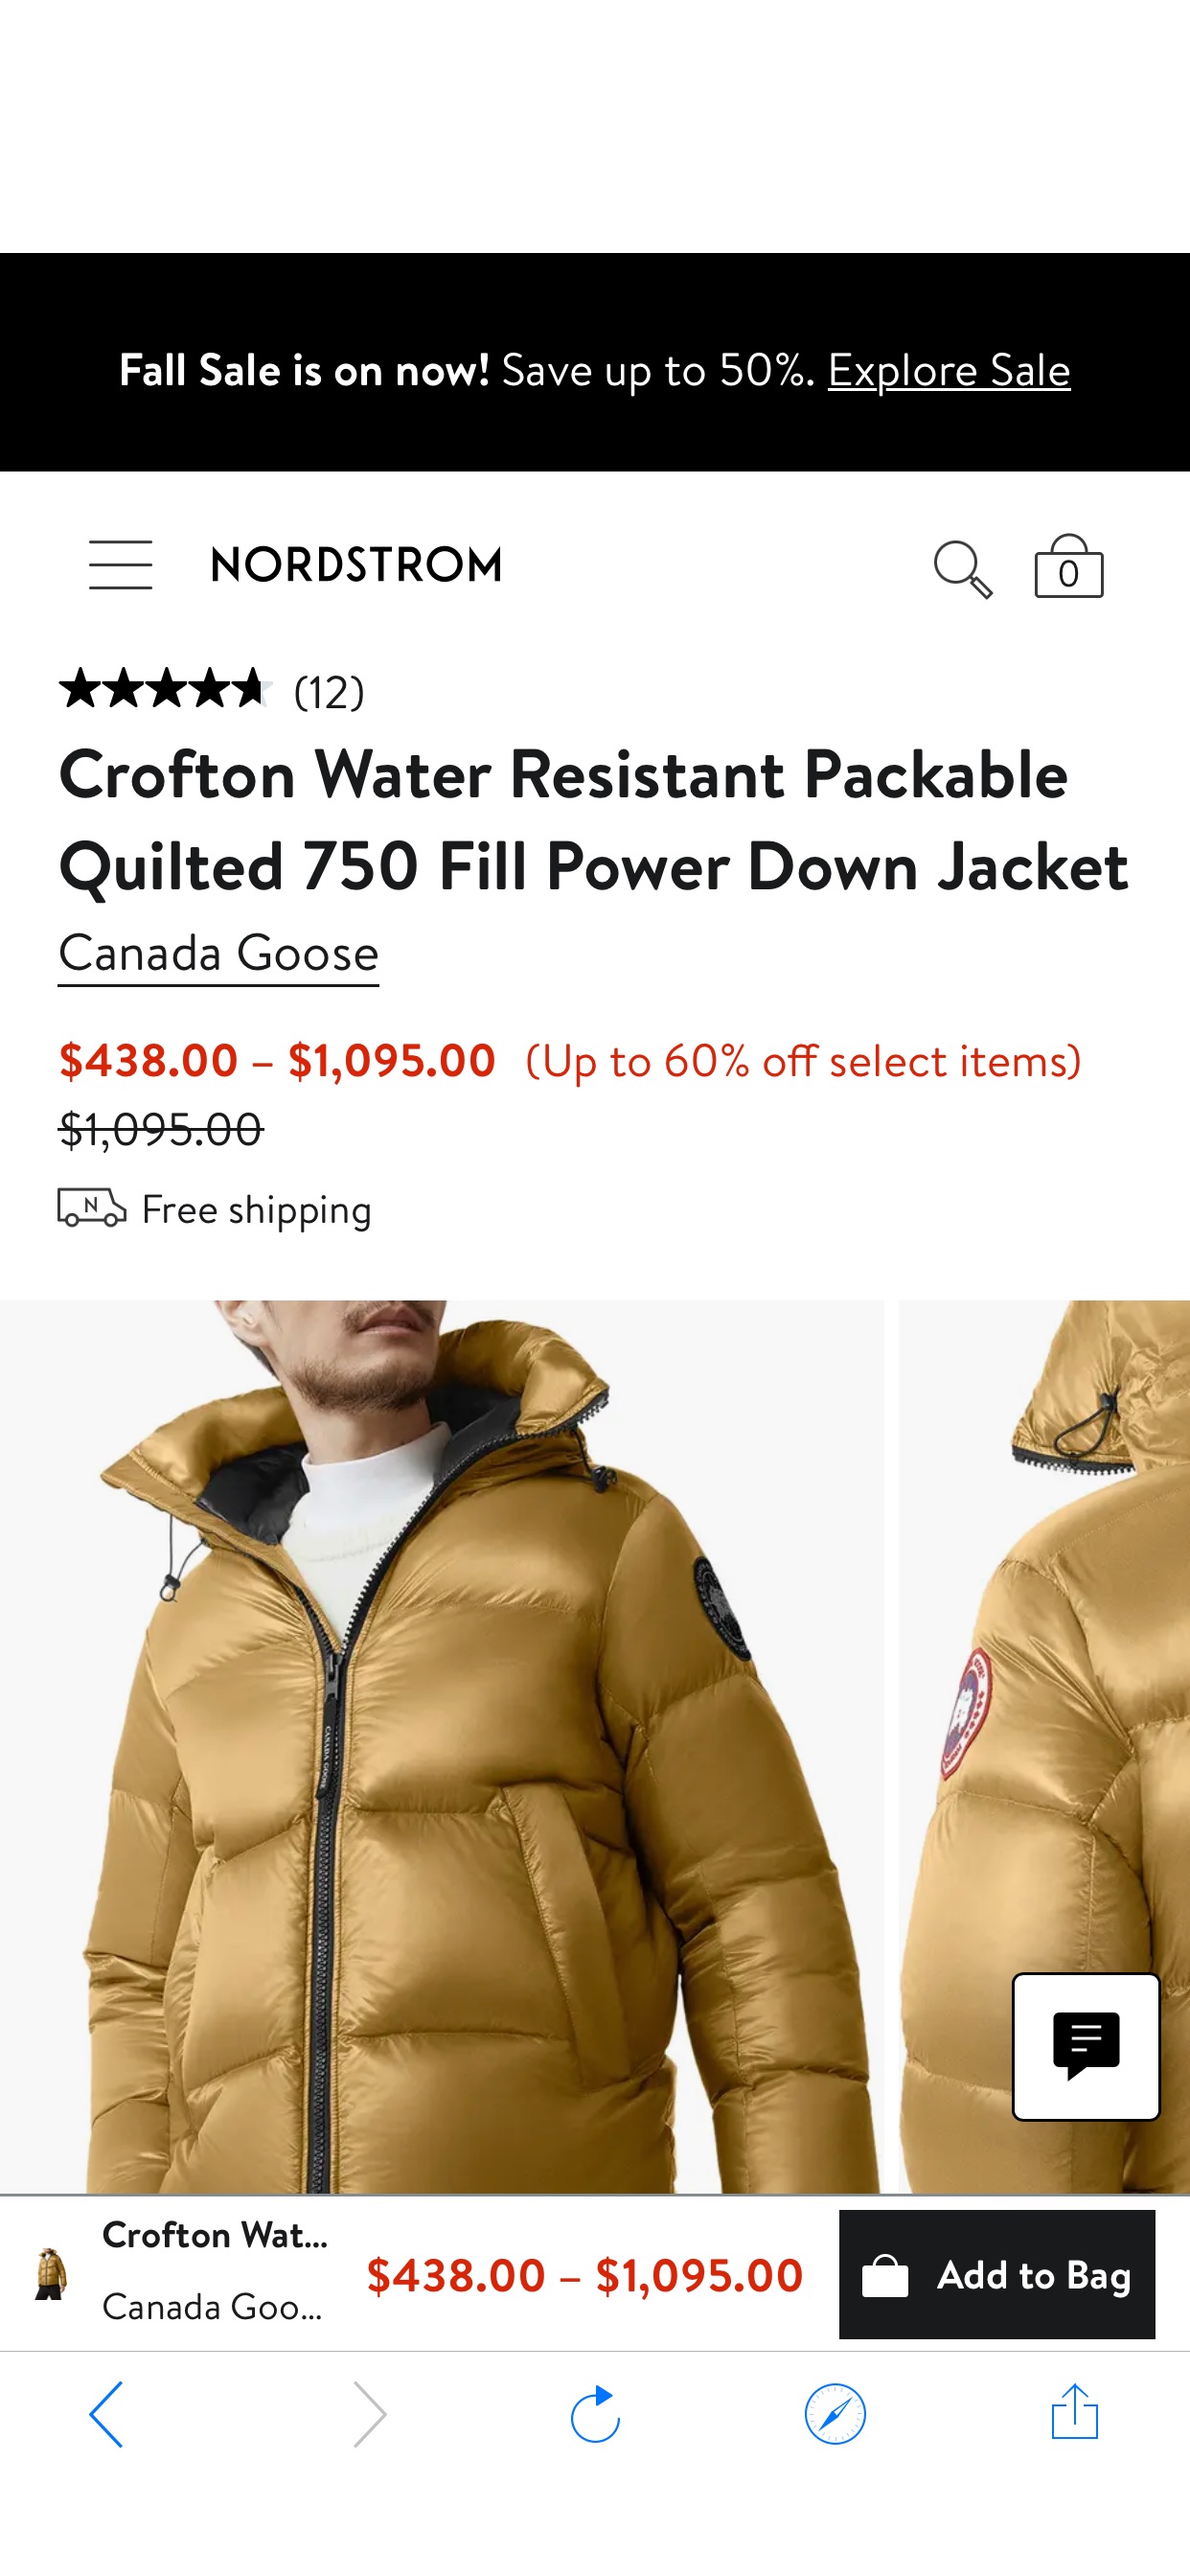 Canada Goose Crofton Water Resistant Packable Quilted 750 Fill Power Down Jacket | Nordstrom